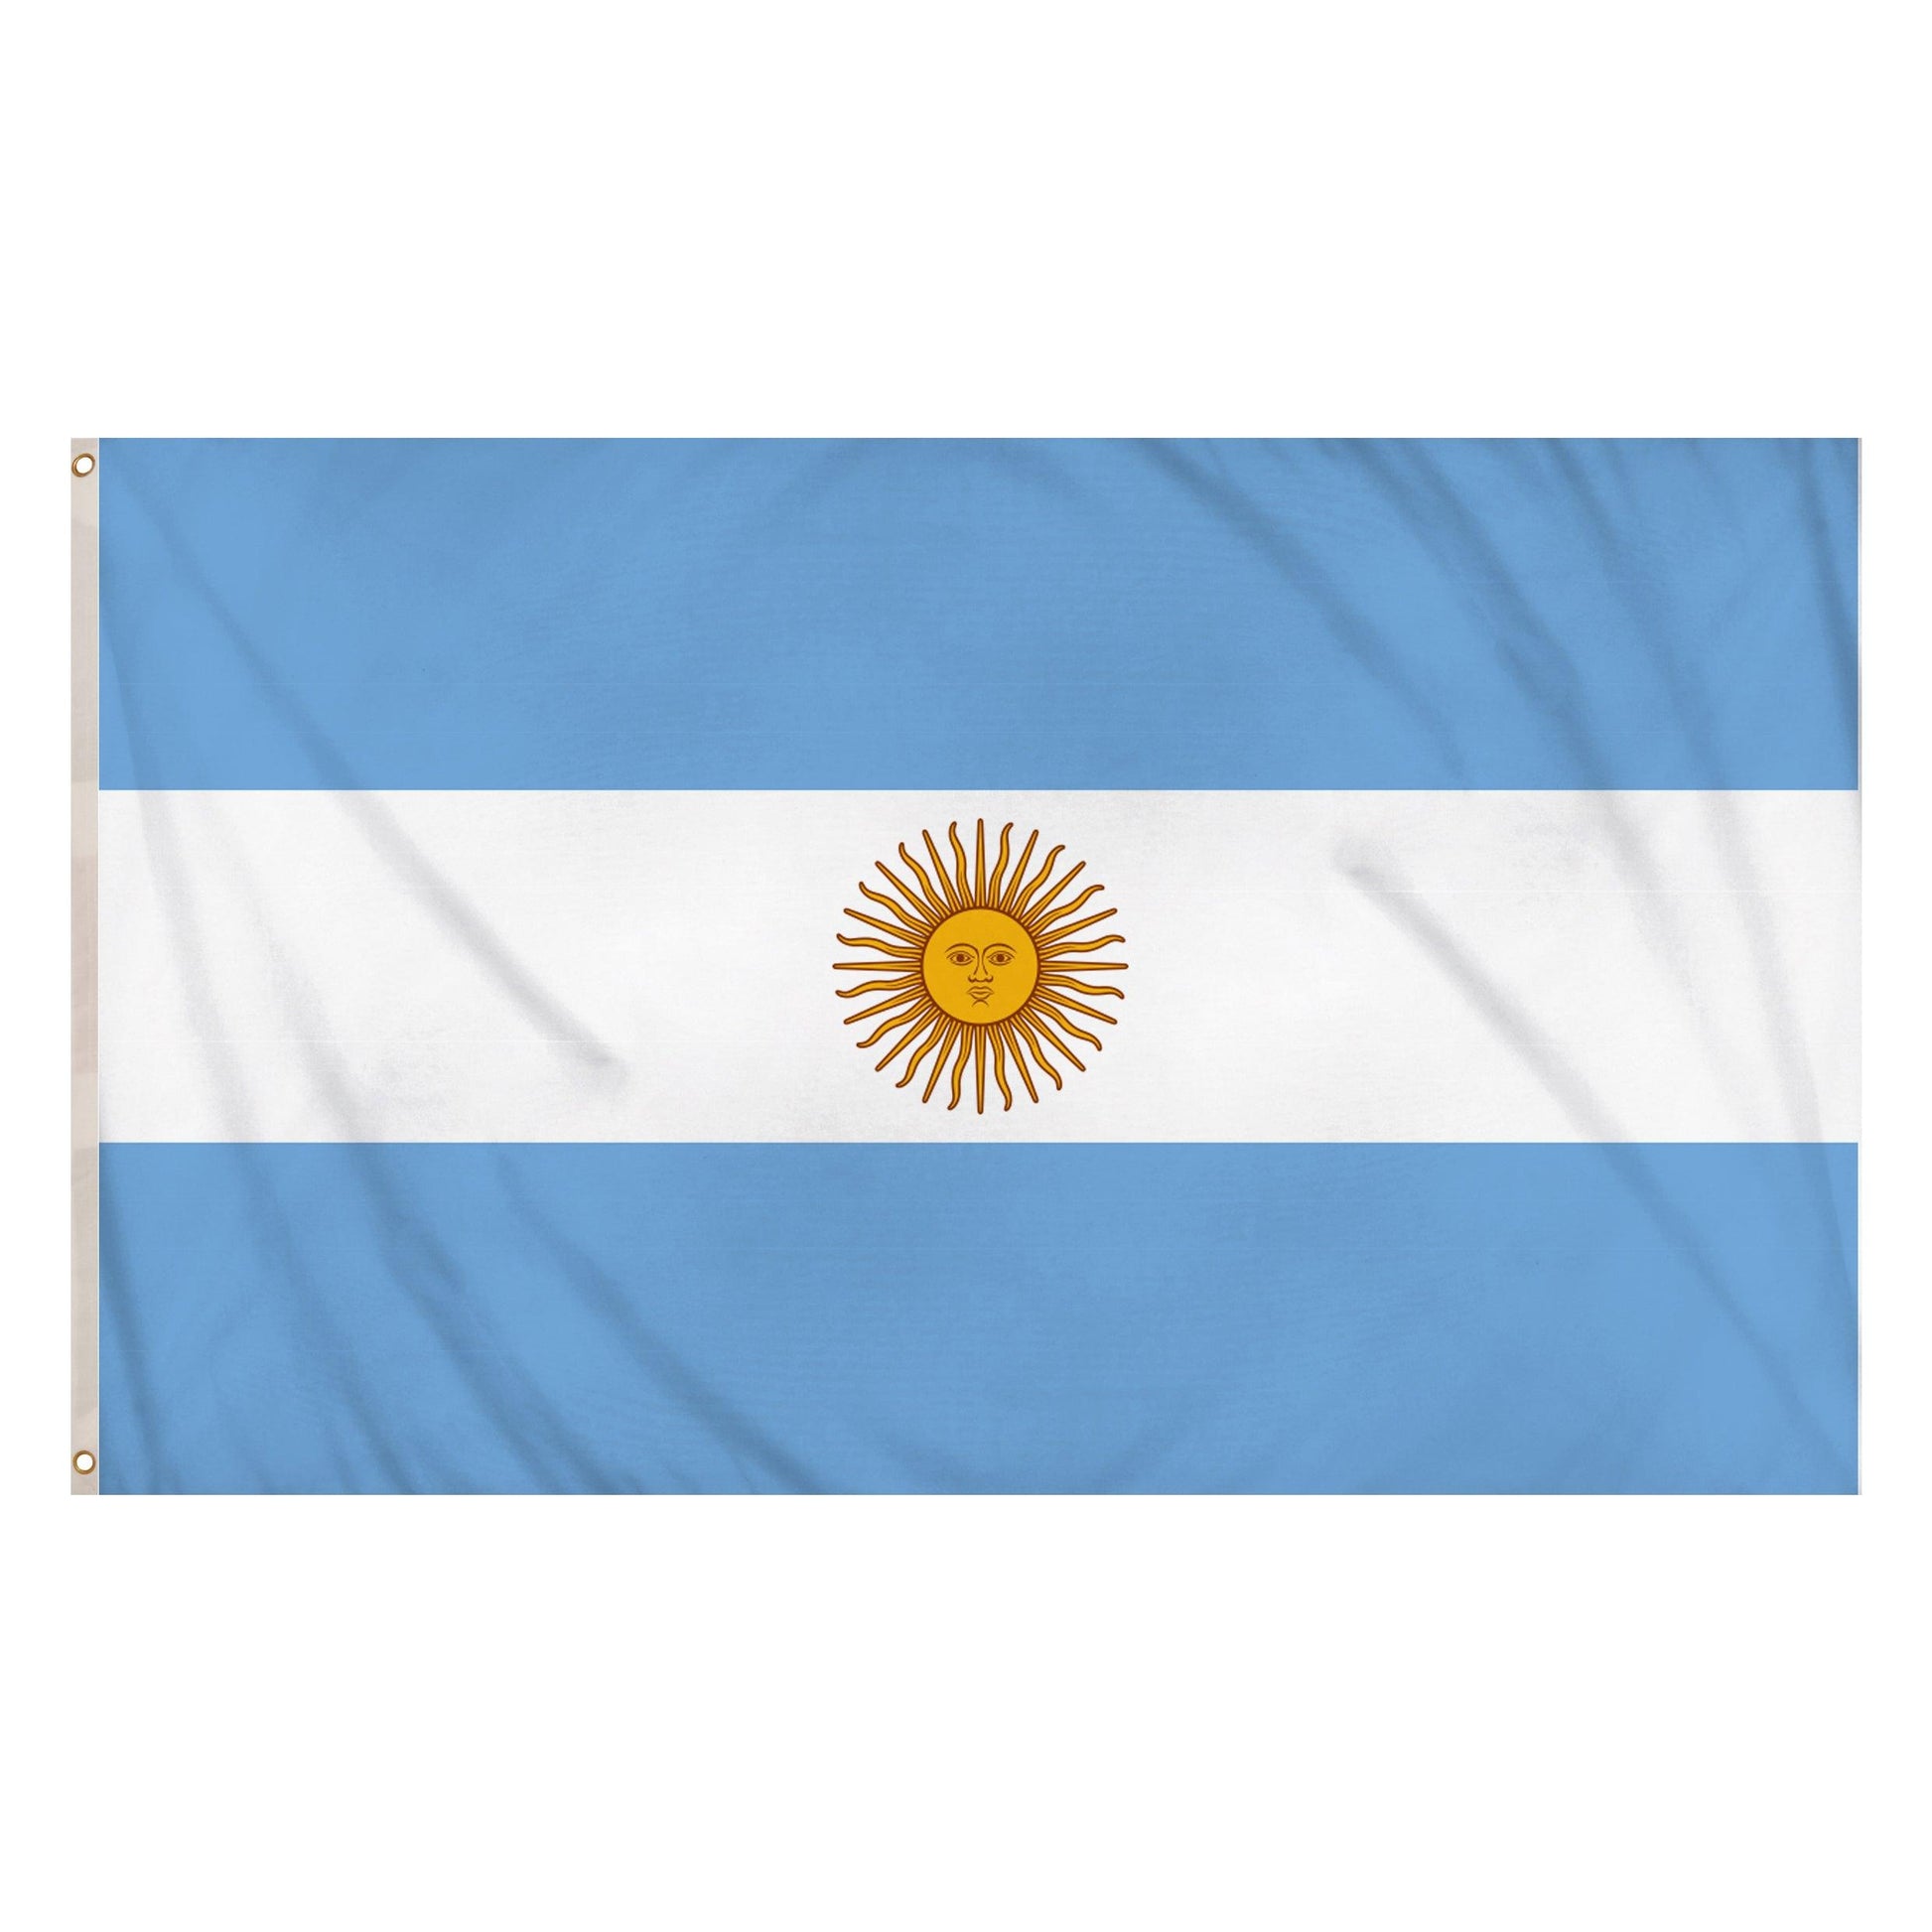 Argentina Flag 5ft x 3ft Double Stitched Seam Metal Eyelets Polyester World Cup Support Flag - Labreeze